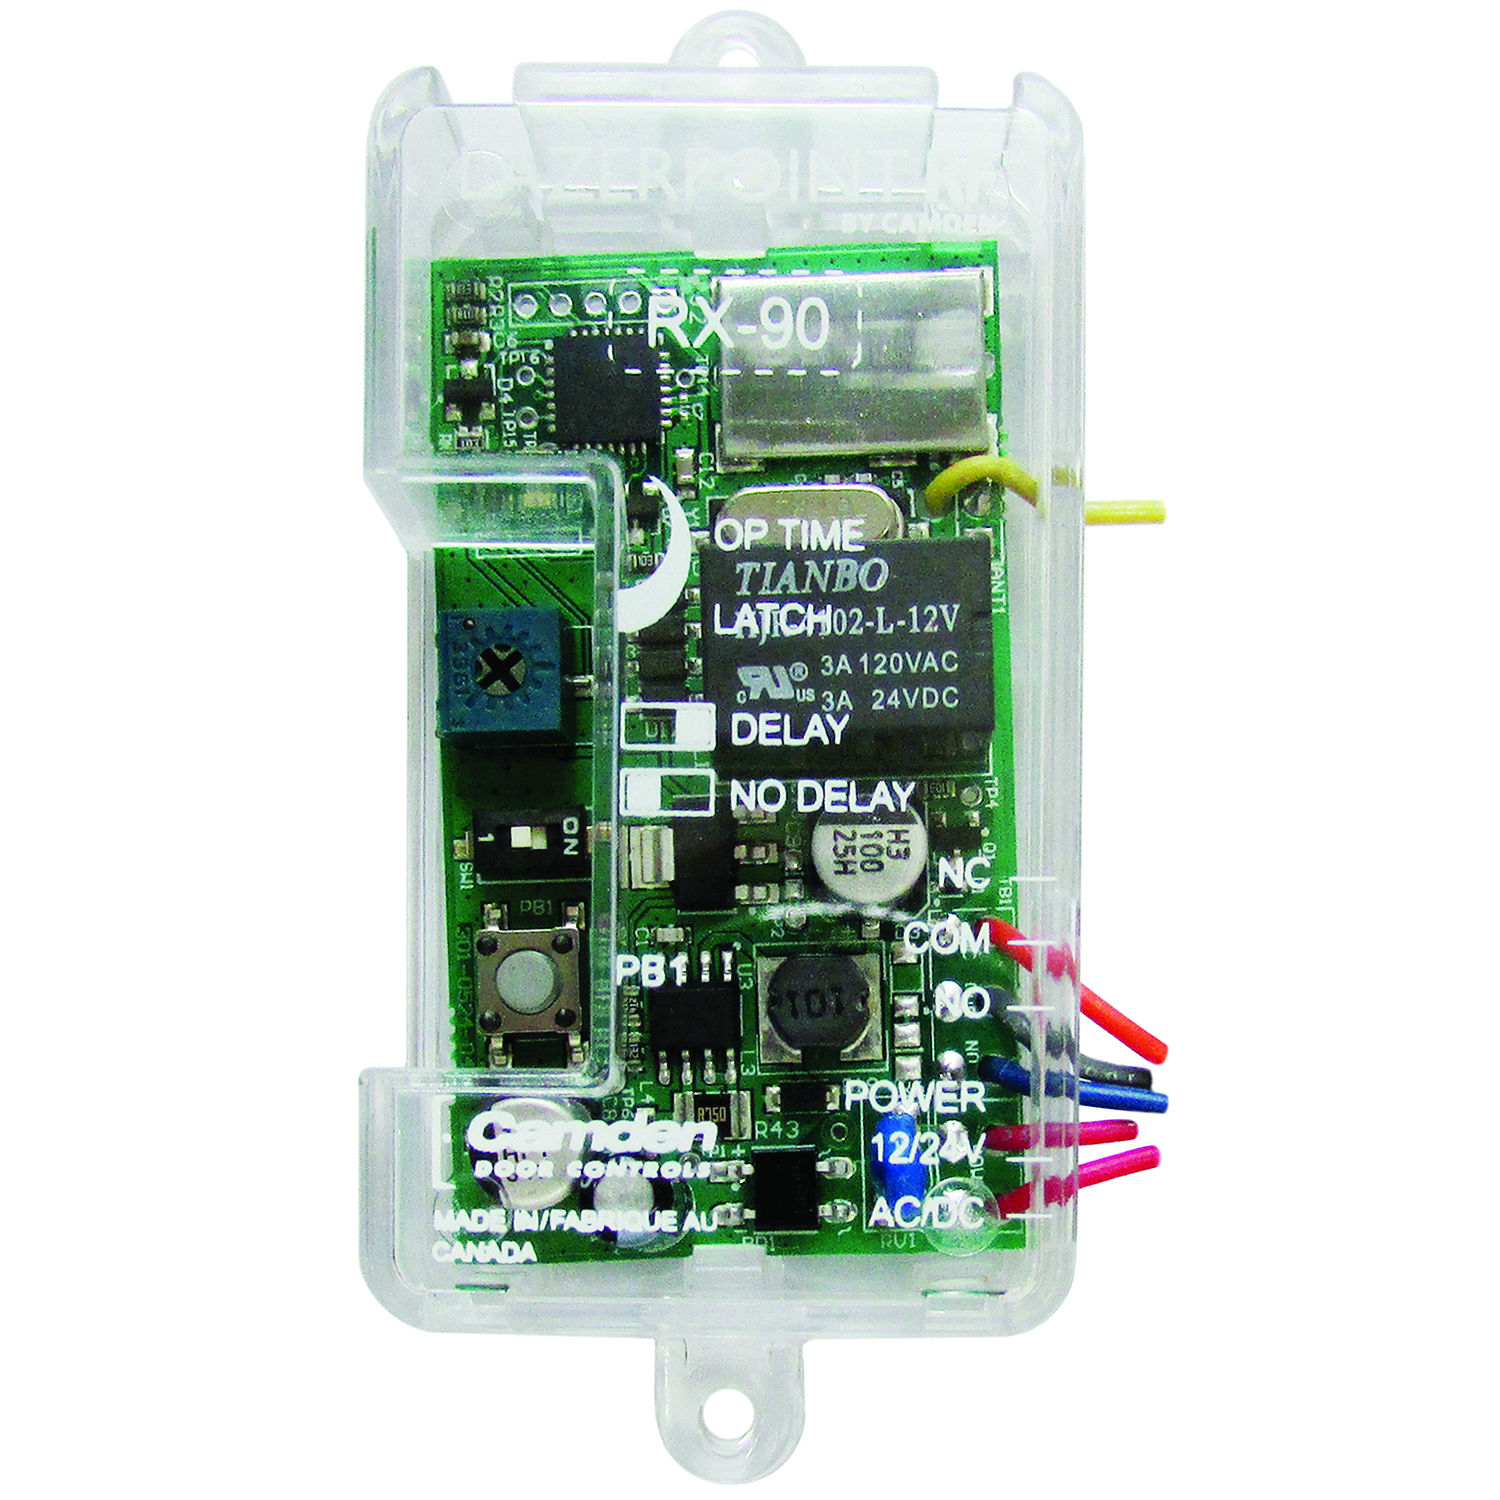 CM-30EE/AT: 2" Sq. LED Illuminated  Exit Switch, w/ timer - Push / Exit Buttons - Activation